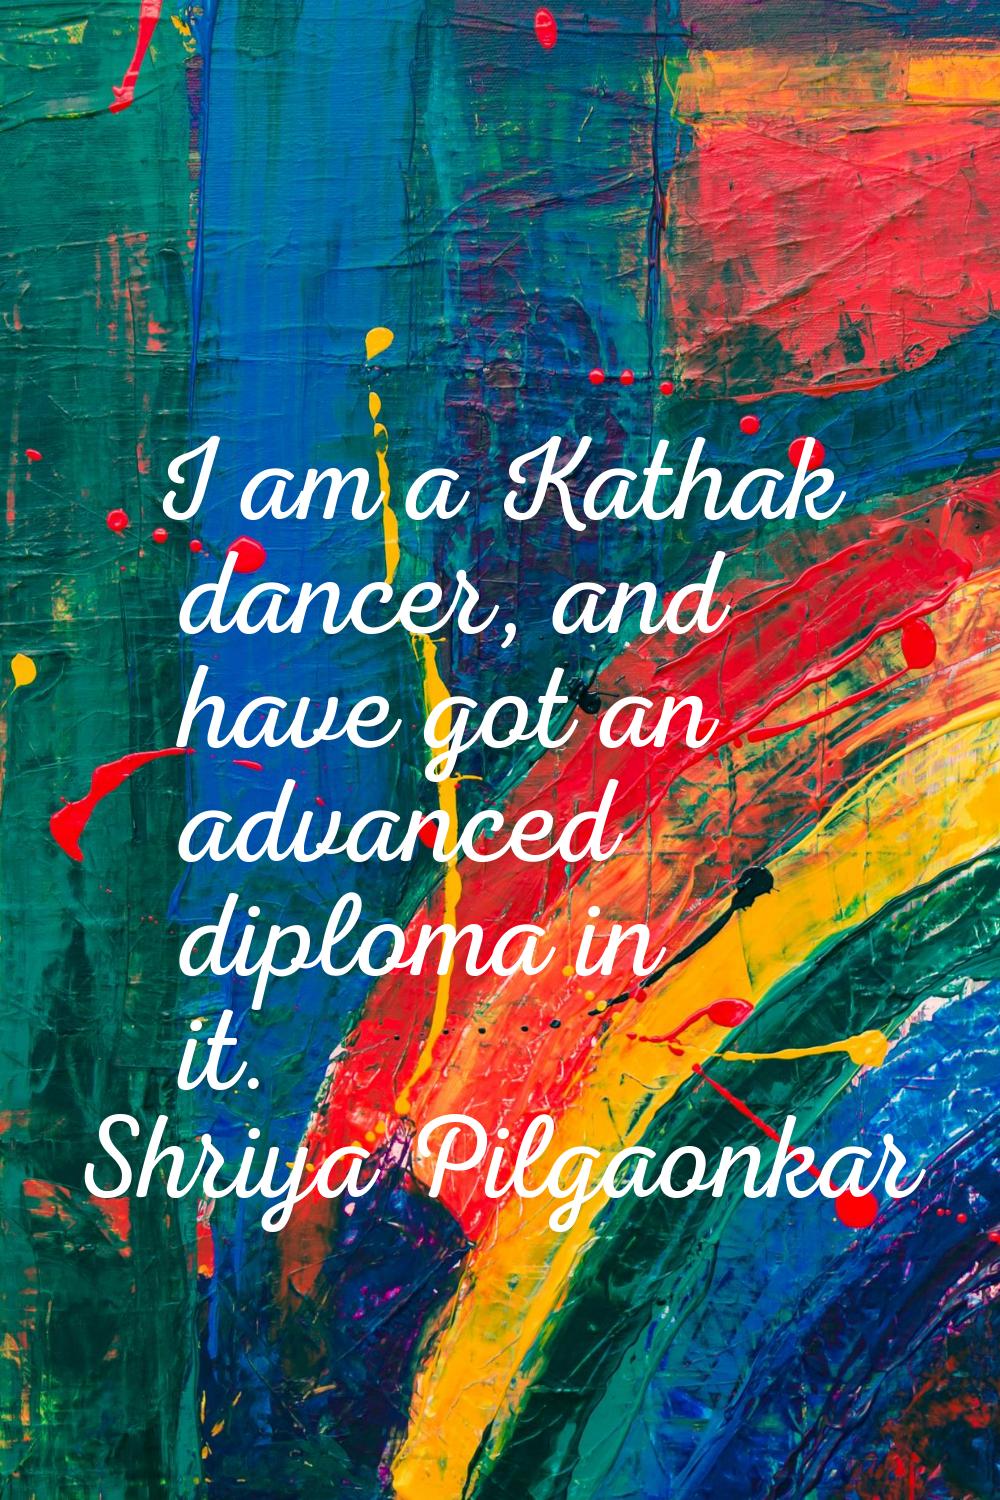 I am a Kathak dancer, and have got an advanced diploma in it.